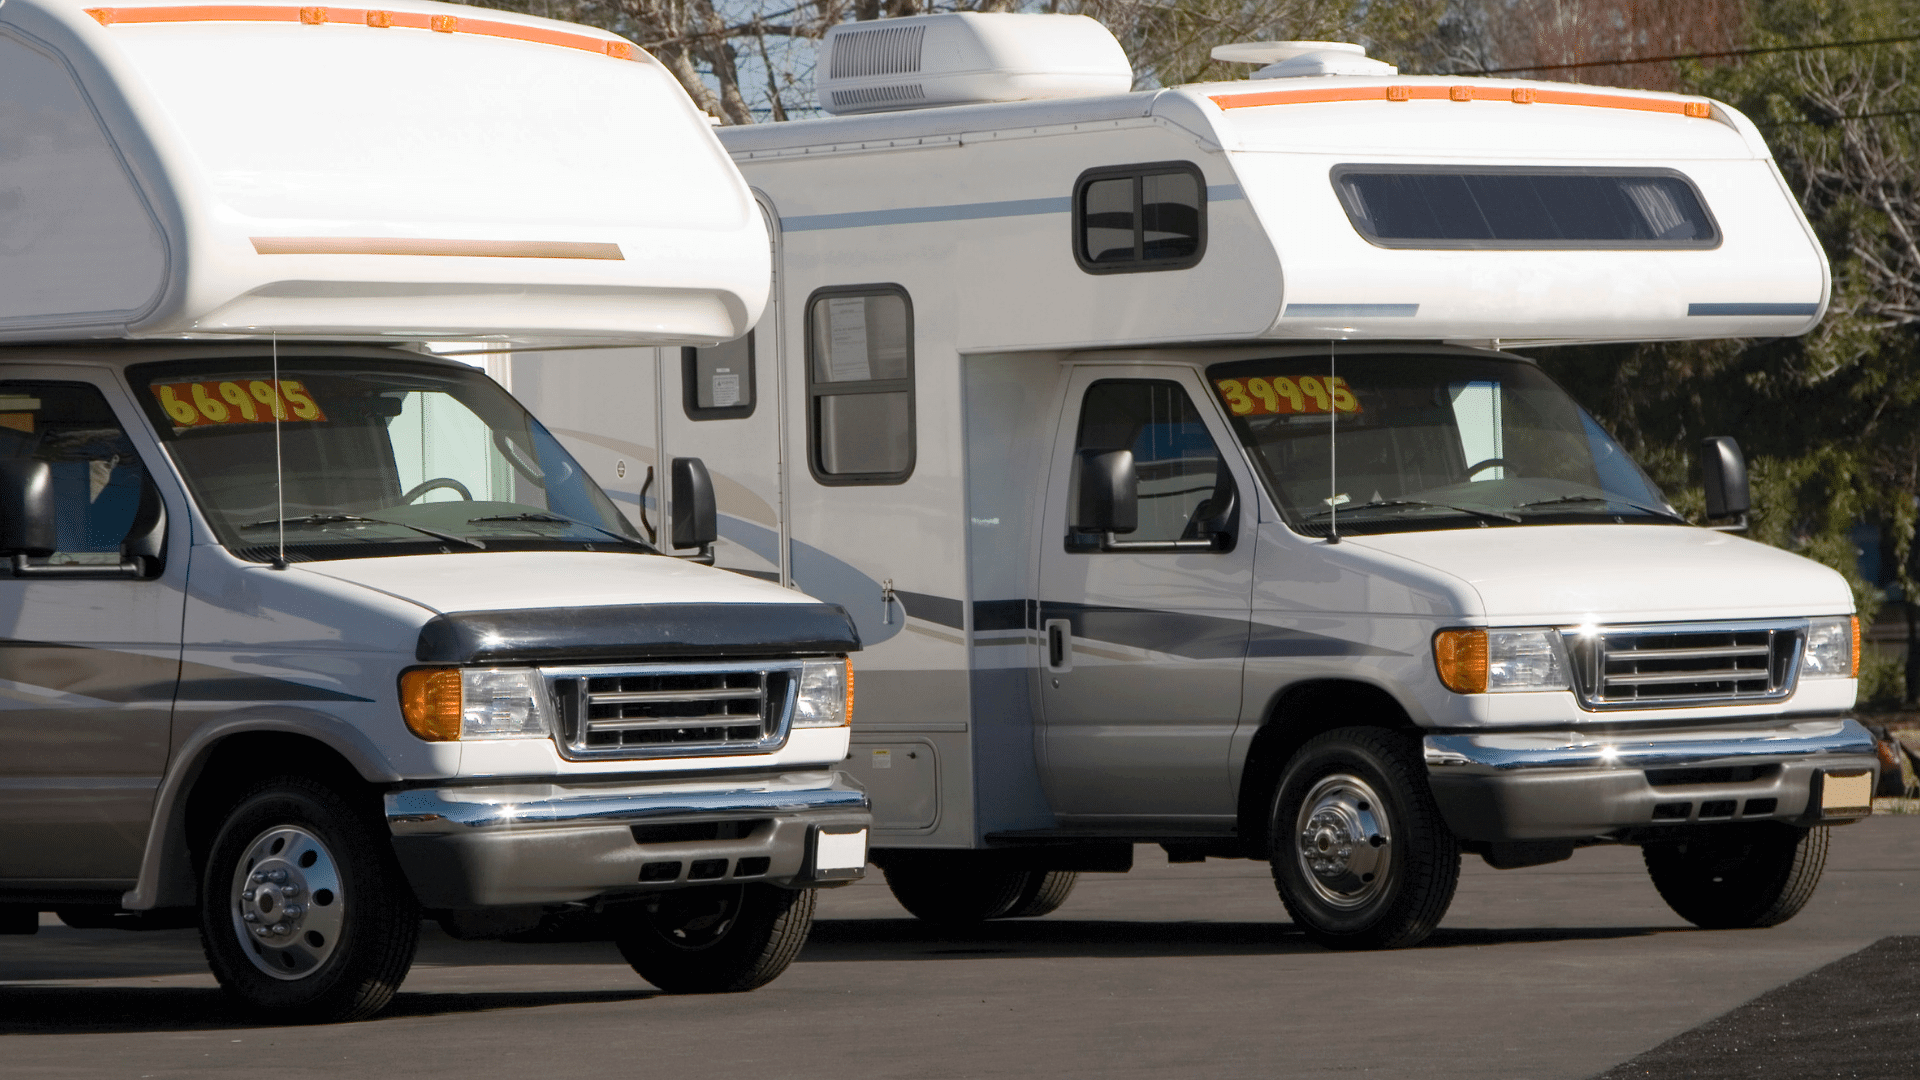 Compare RV Prices Bottom Line Cost And More Getaway Couple